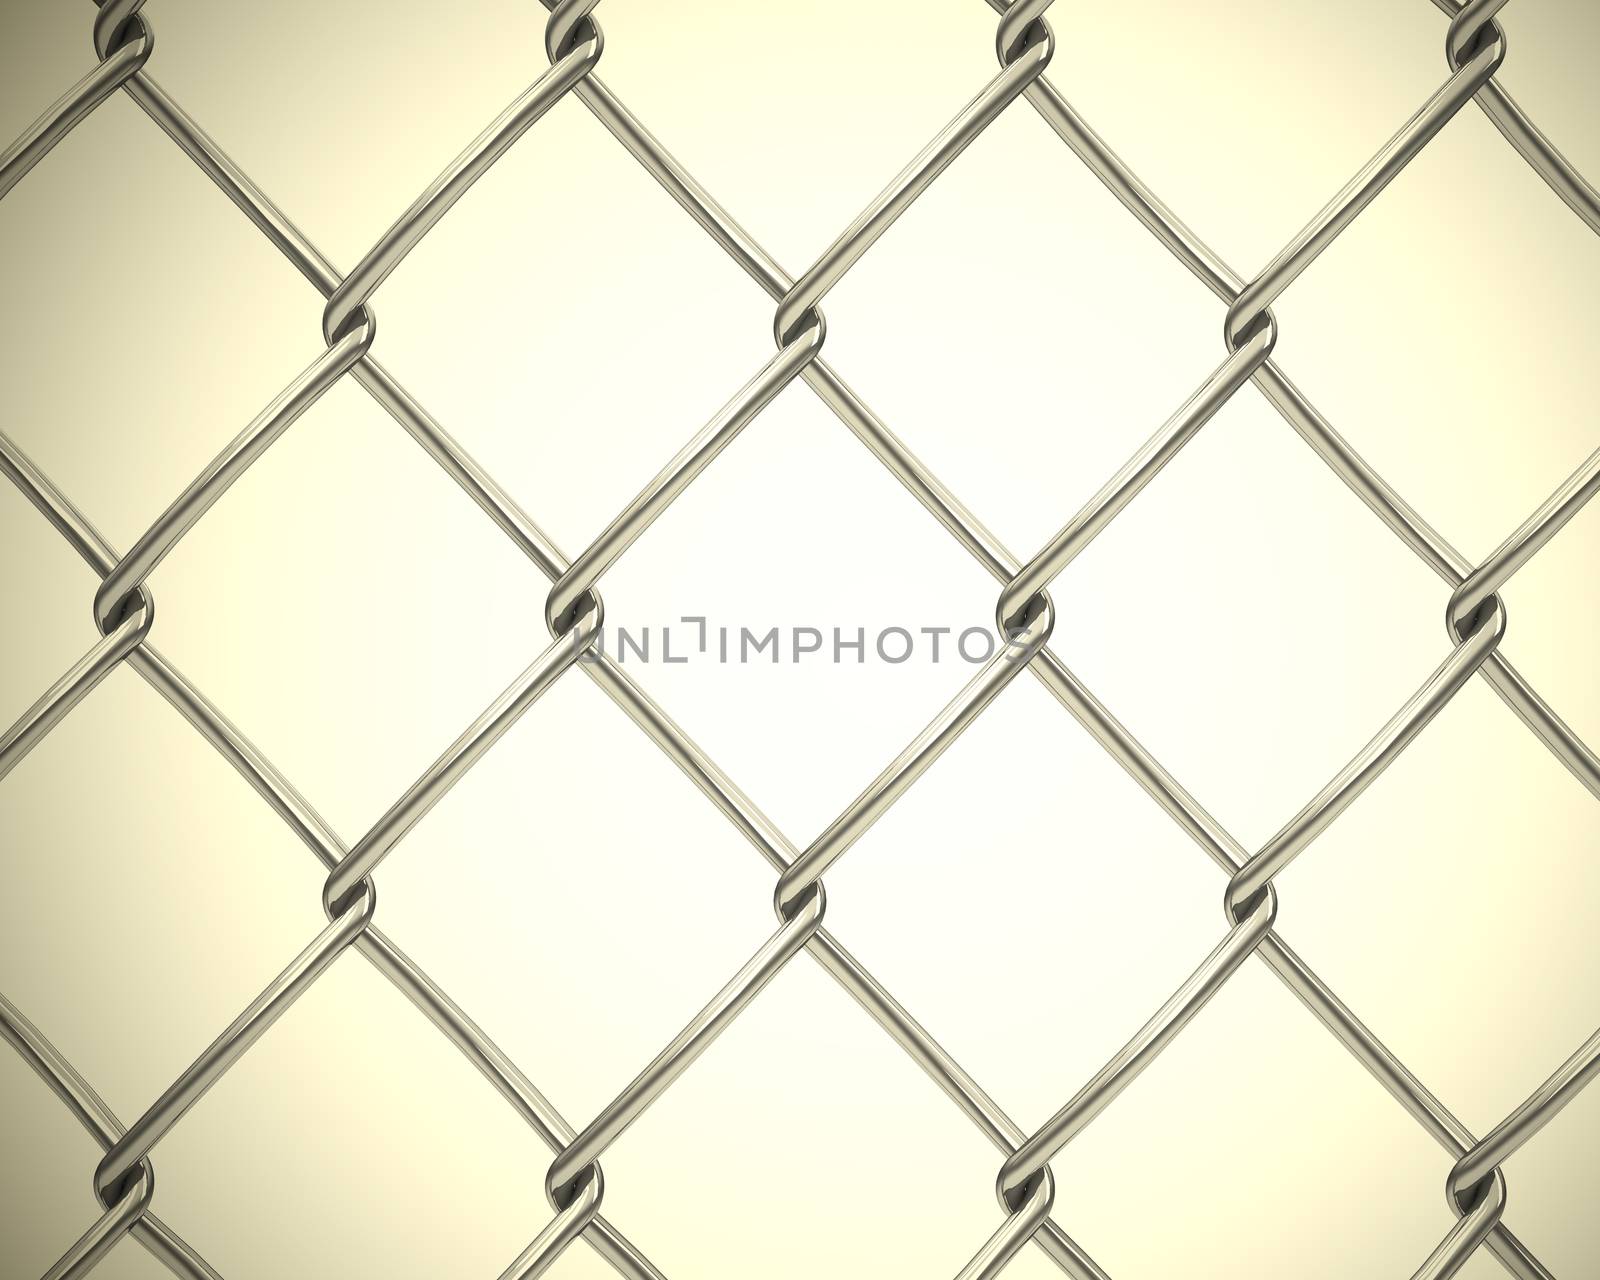 the wire fence by delta_art